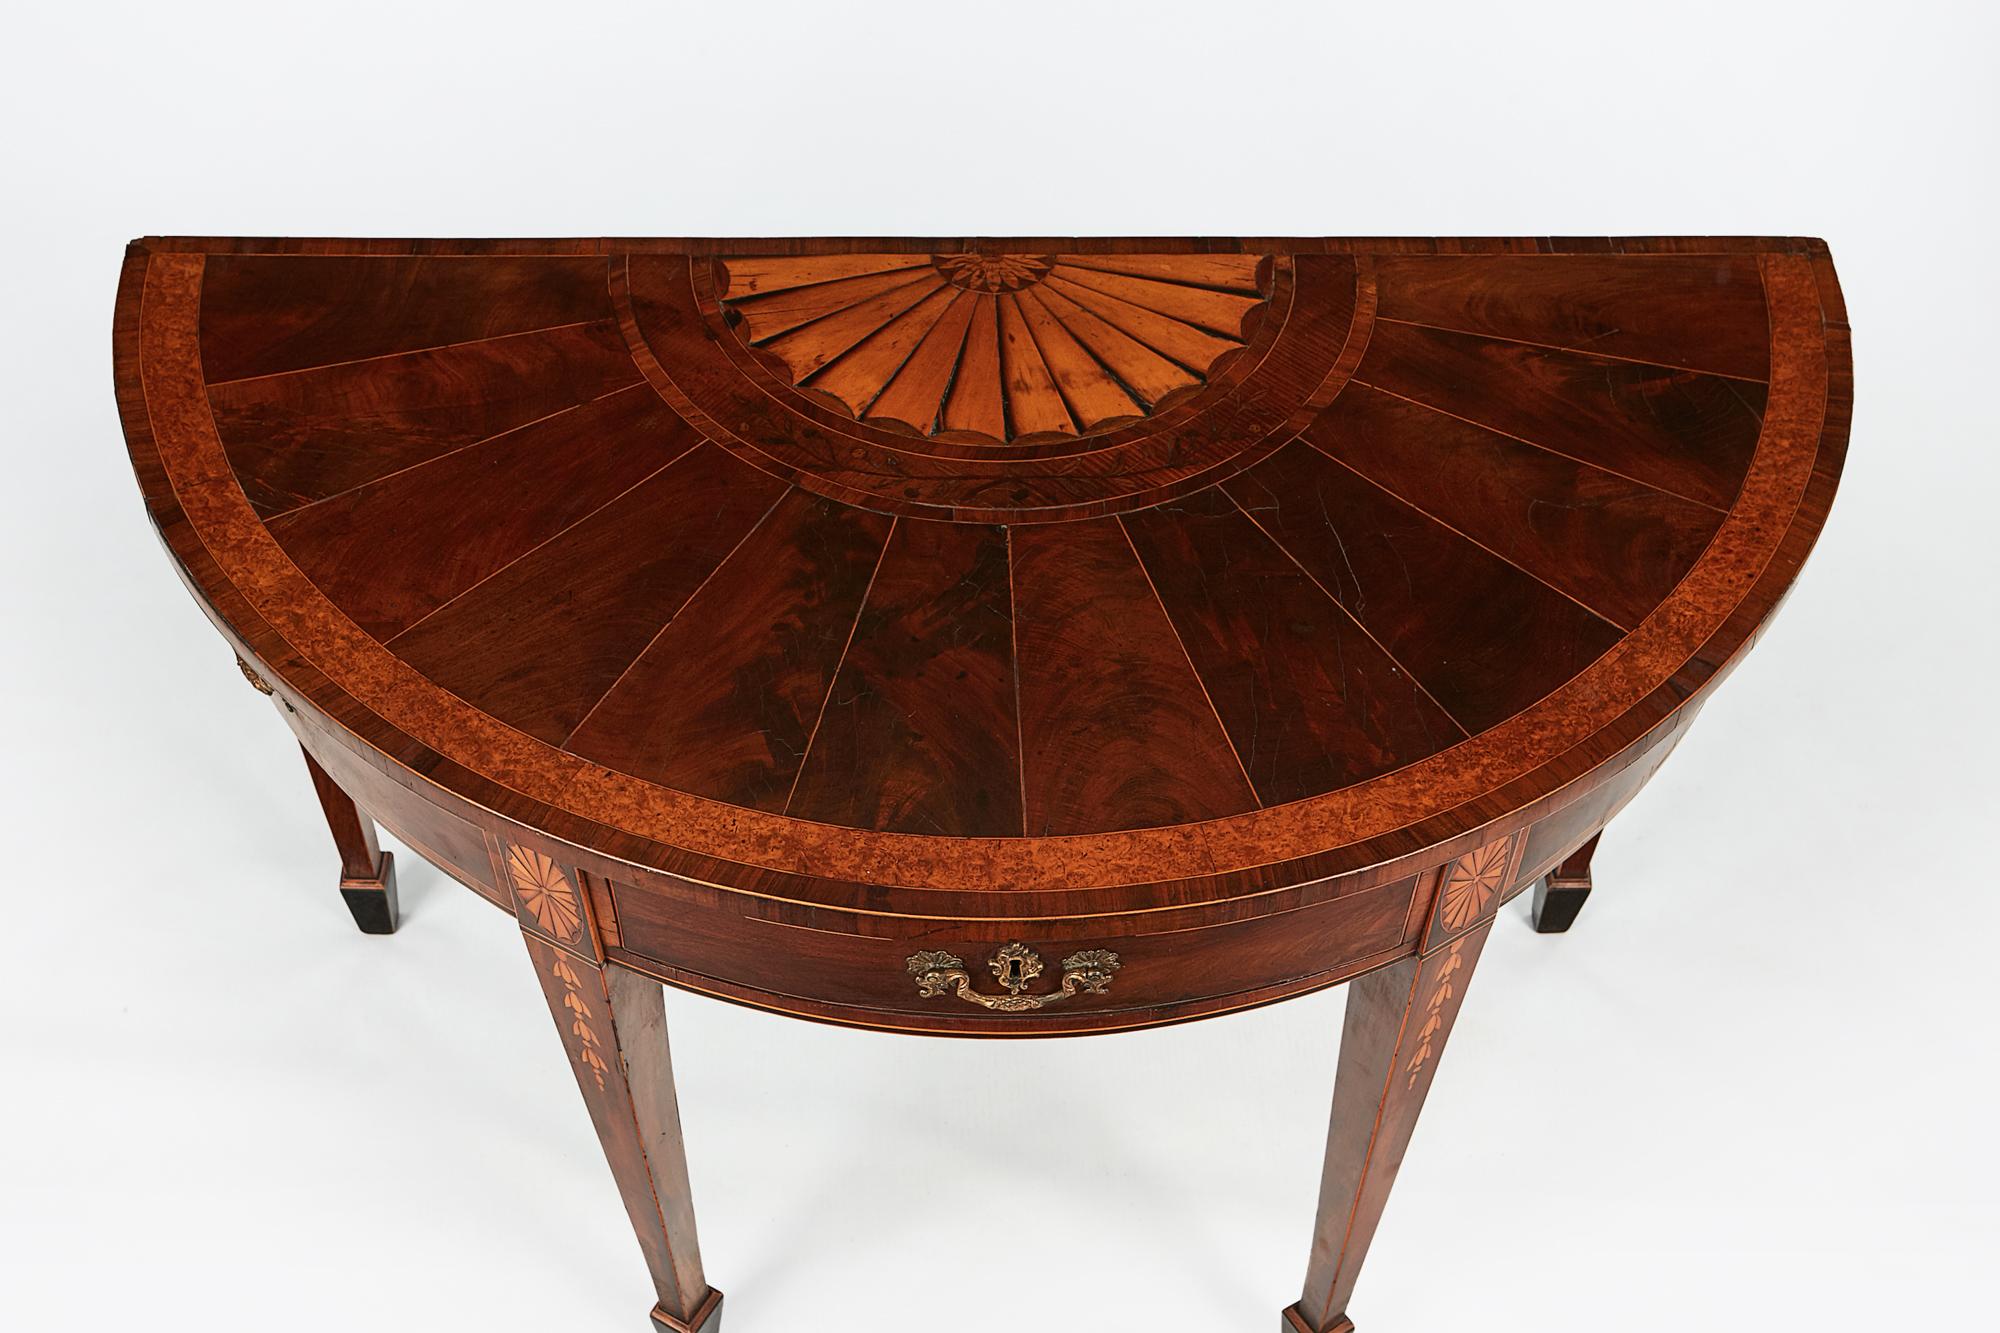 Irish Early 19th Century Regency Demilune Table after William Moore For Sale